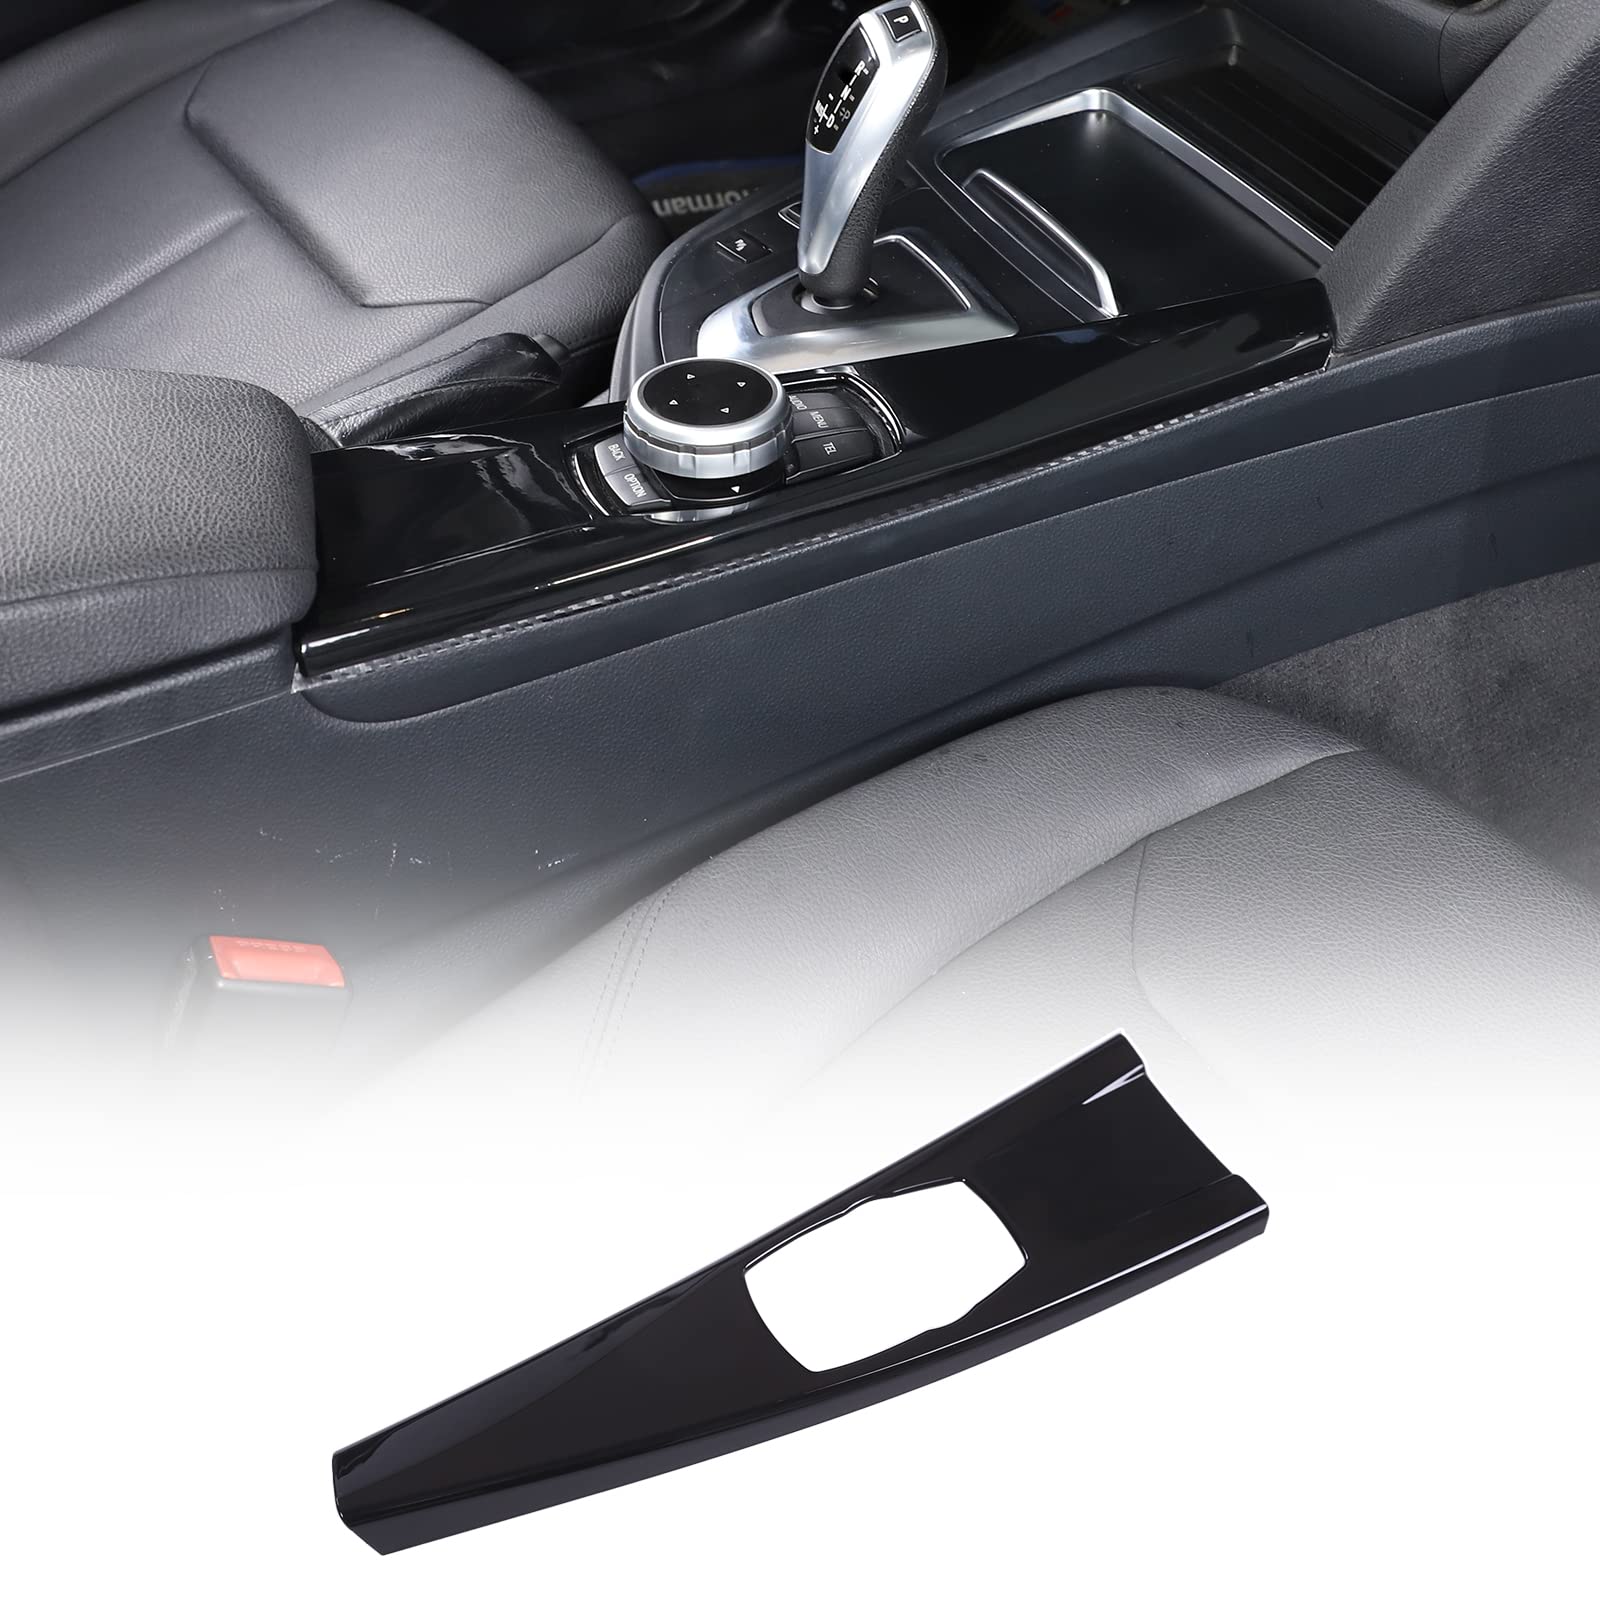 ABS Auto Interior Center Console Multimedia Button Panel Trim Cover Fit for BMW 3er F30 F34 / 4er F33 F36 2013-2019 (Linkslenker, Gloss Black) von Uieohout